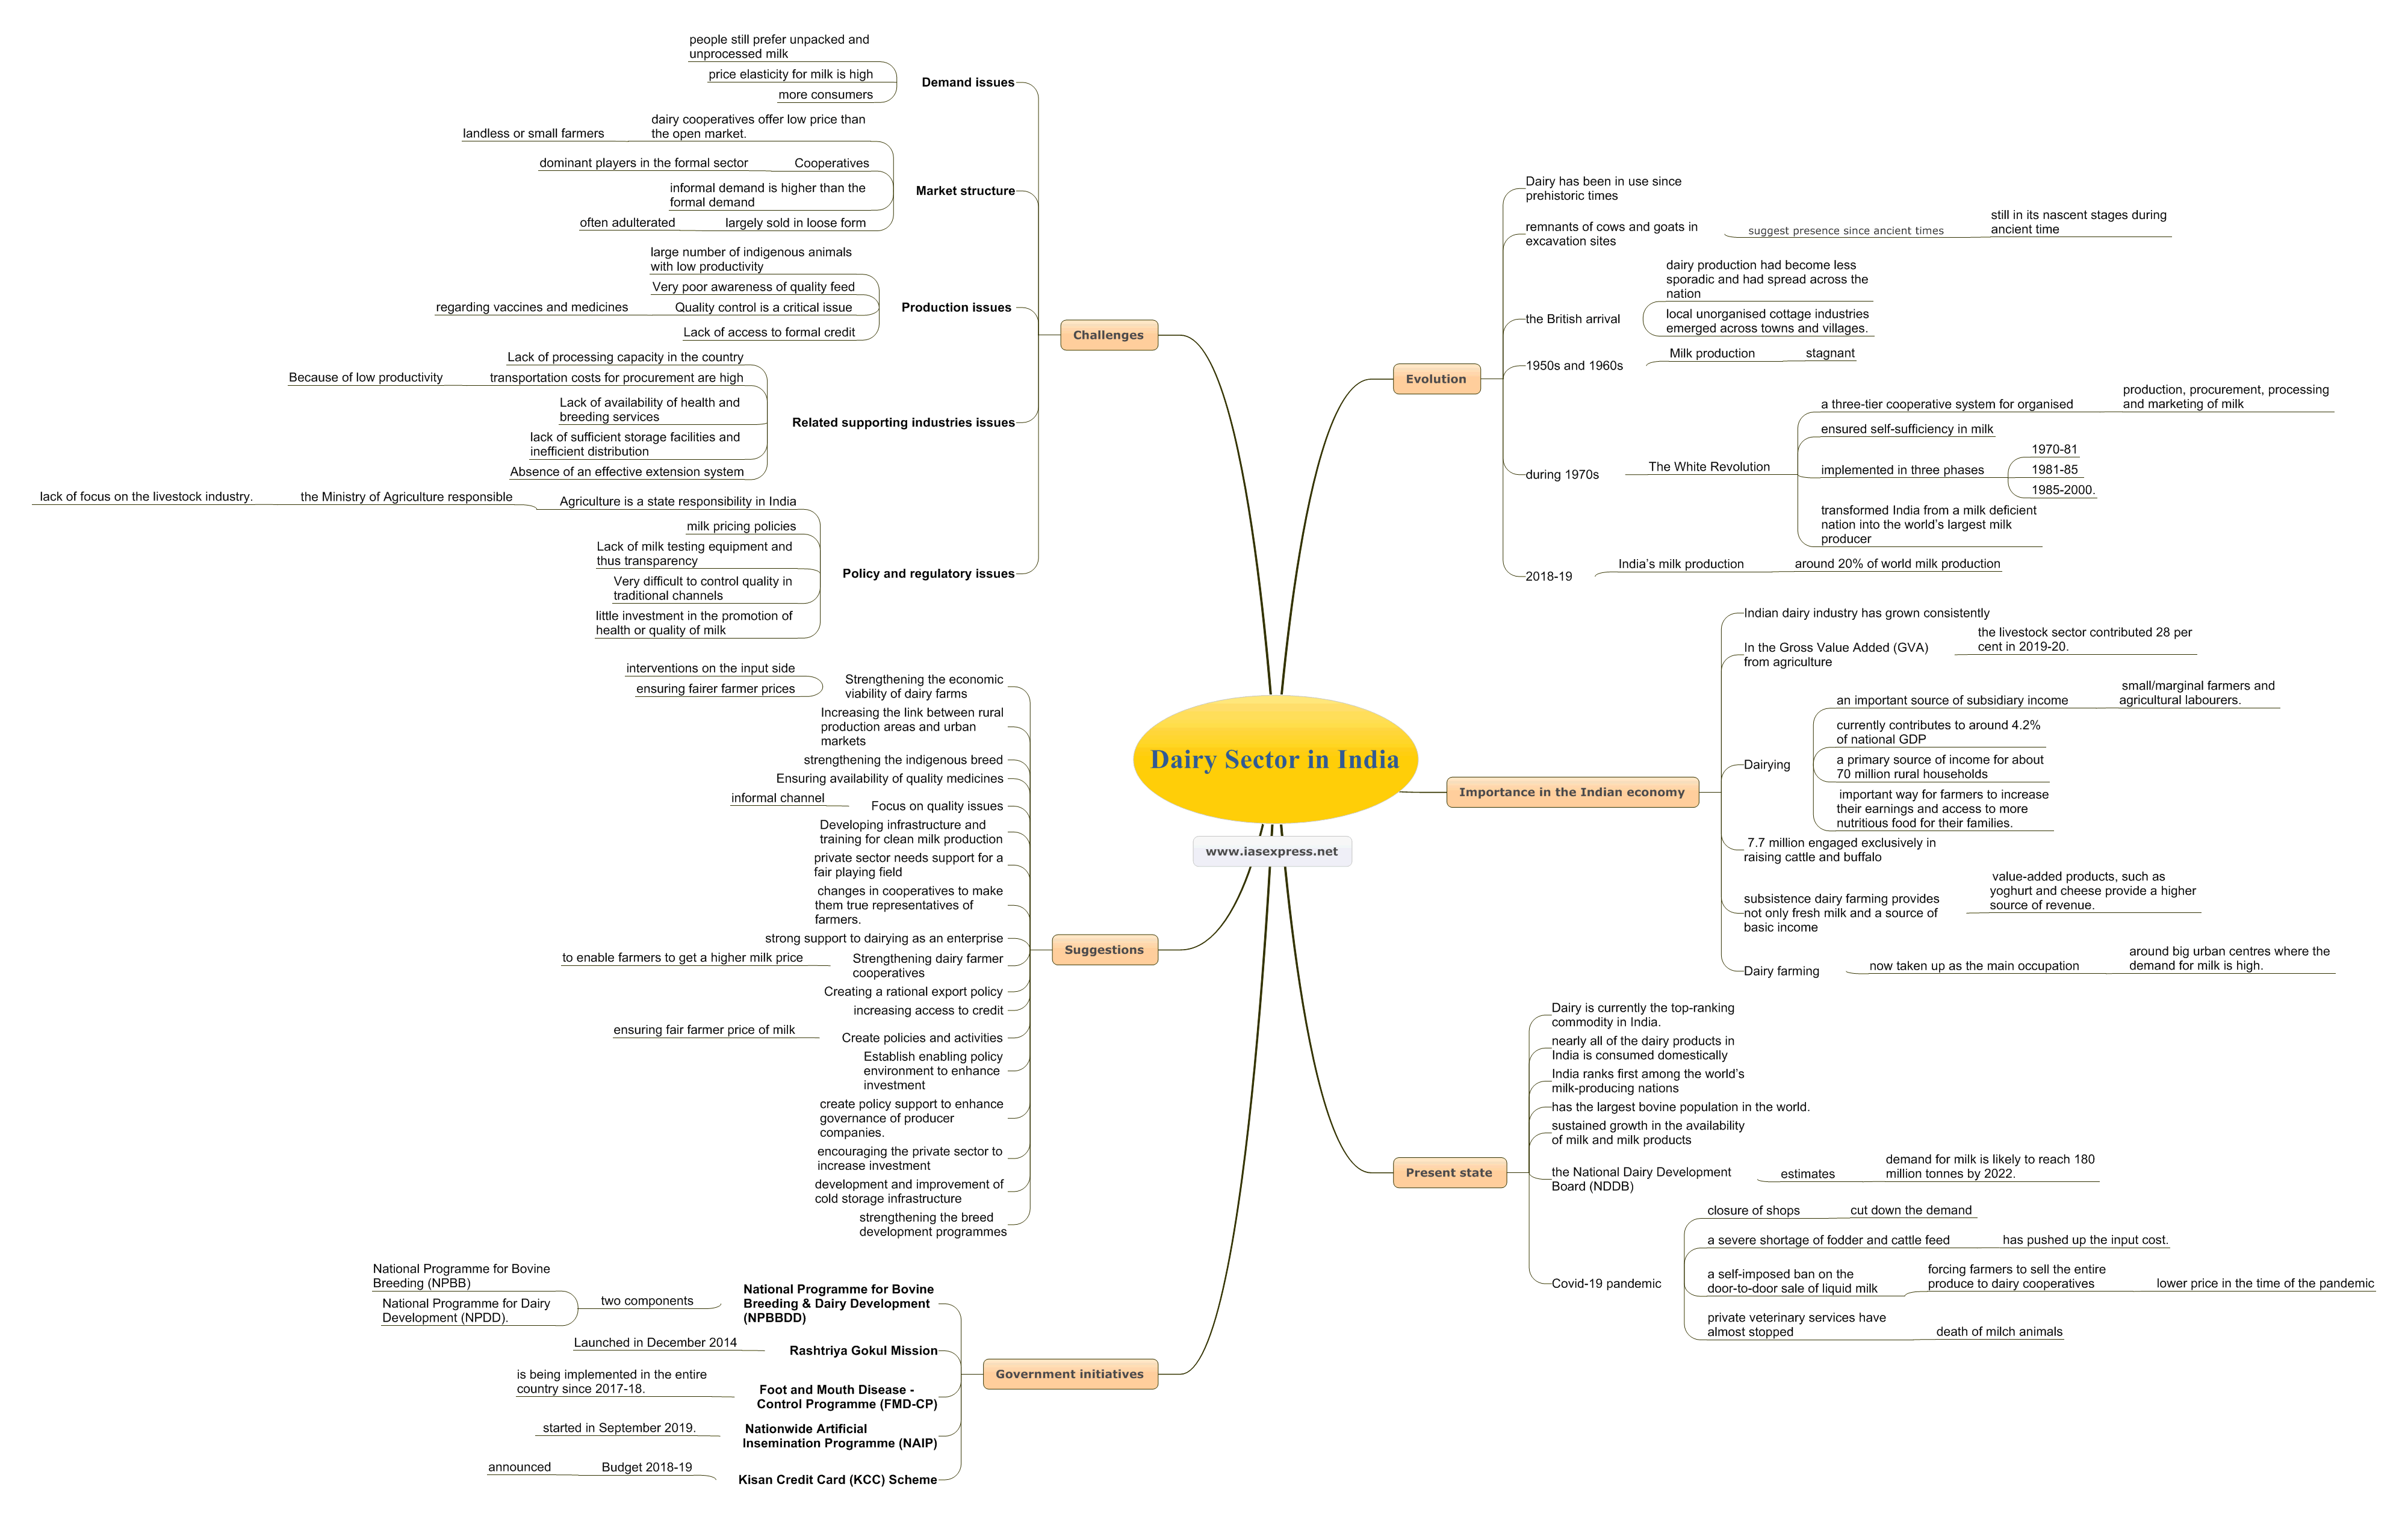 Dairy-Sector-in-India mindmap